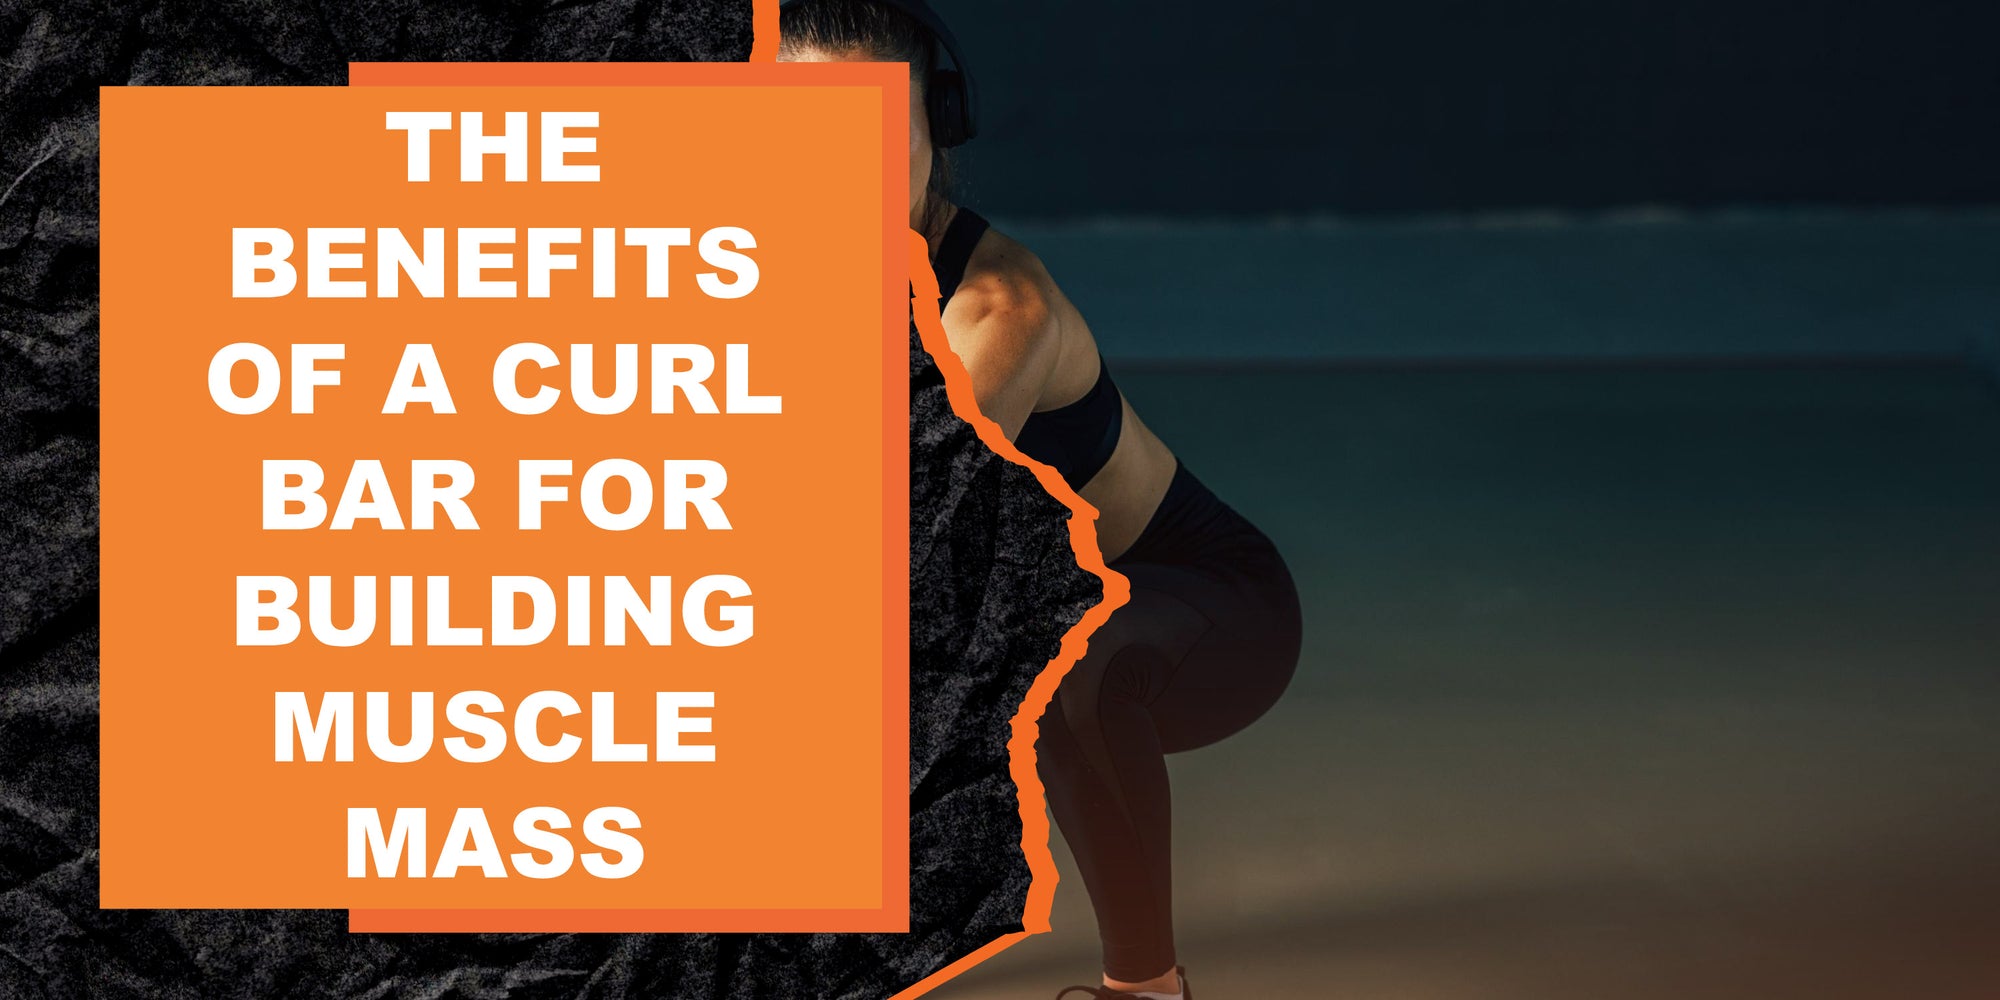 The Benefits of a Curl Bar for Building Muscle Mass